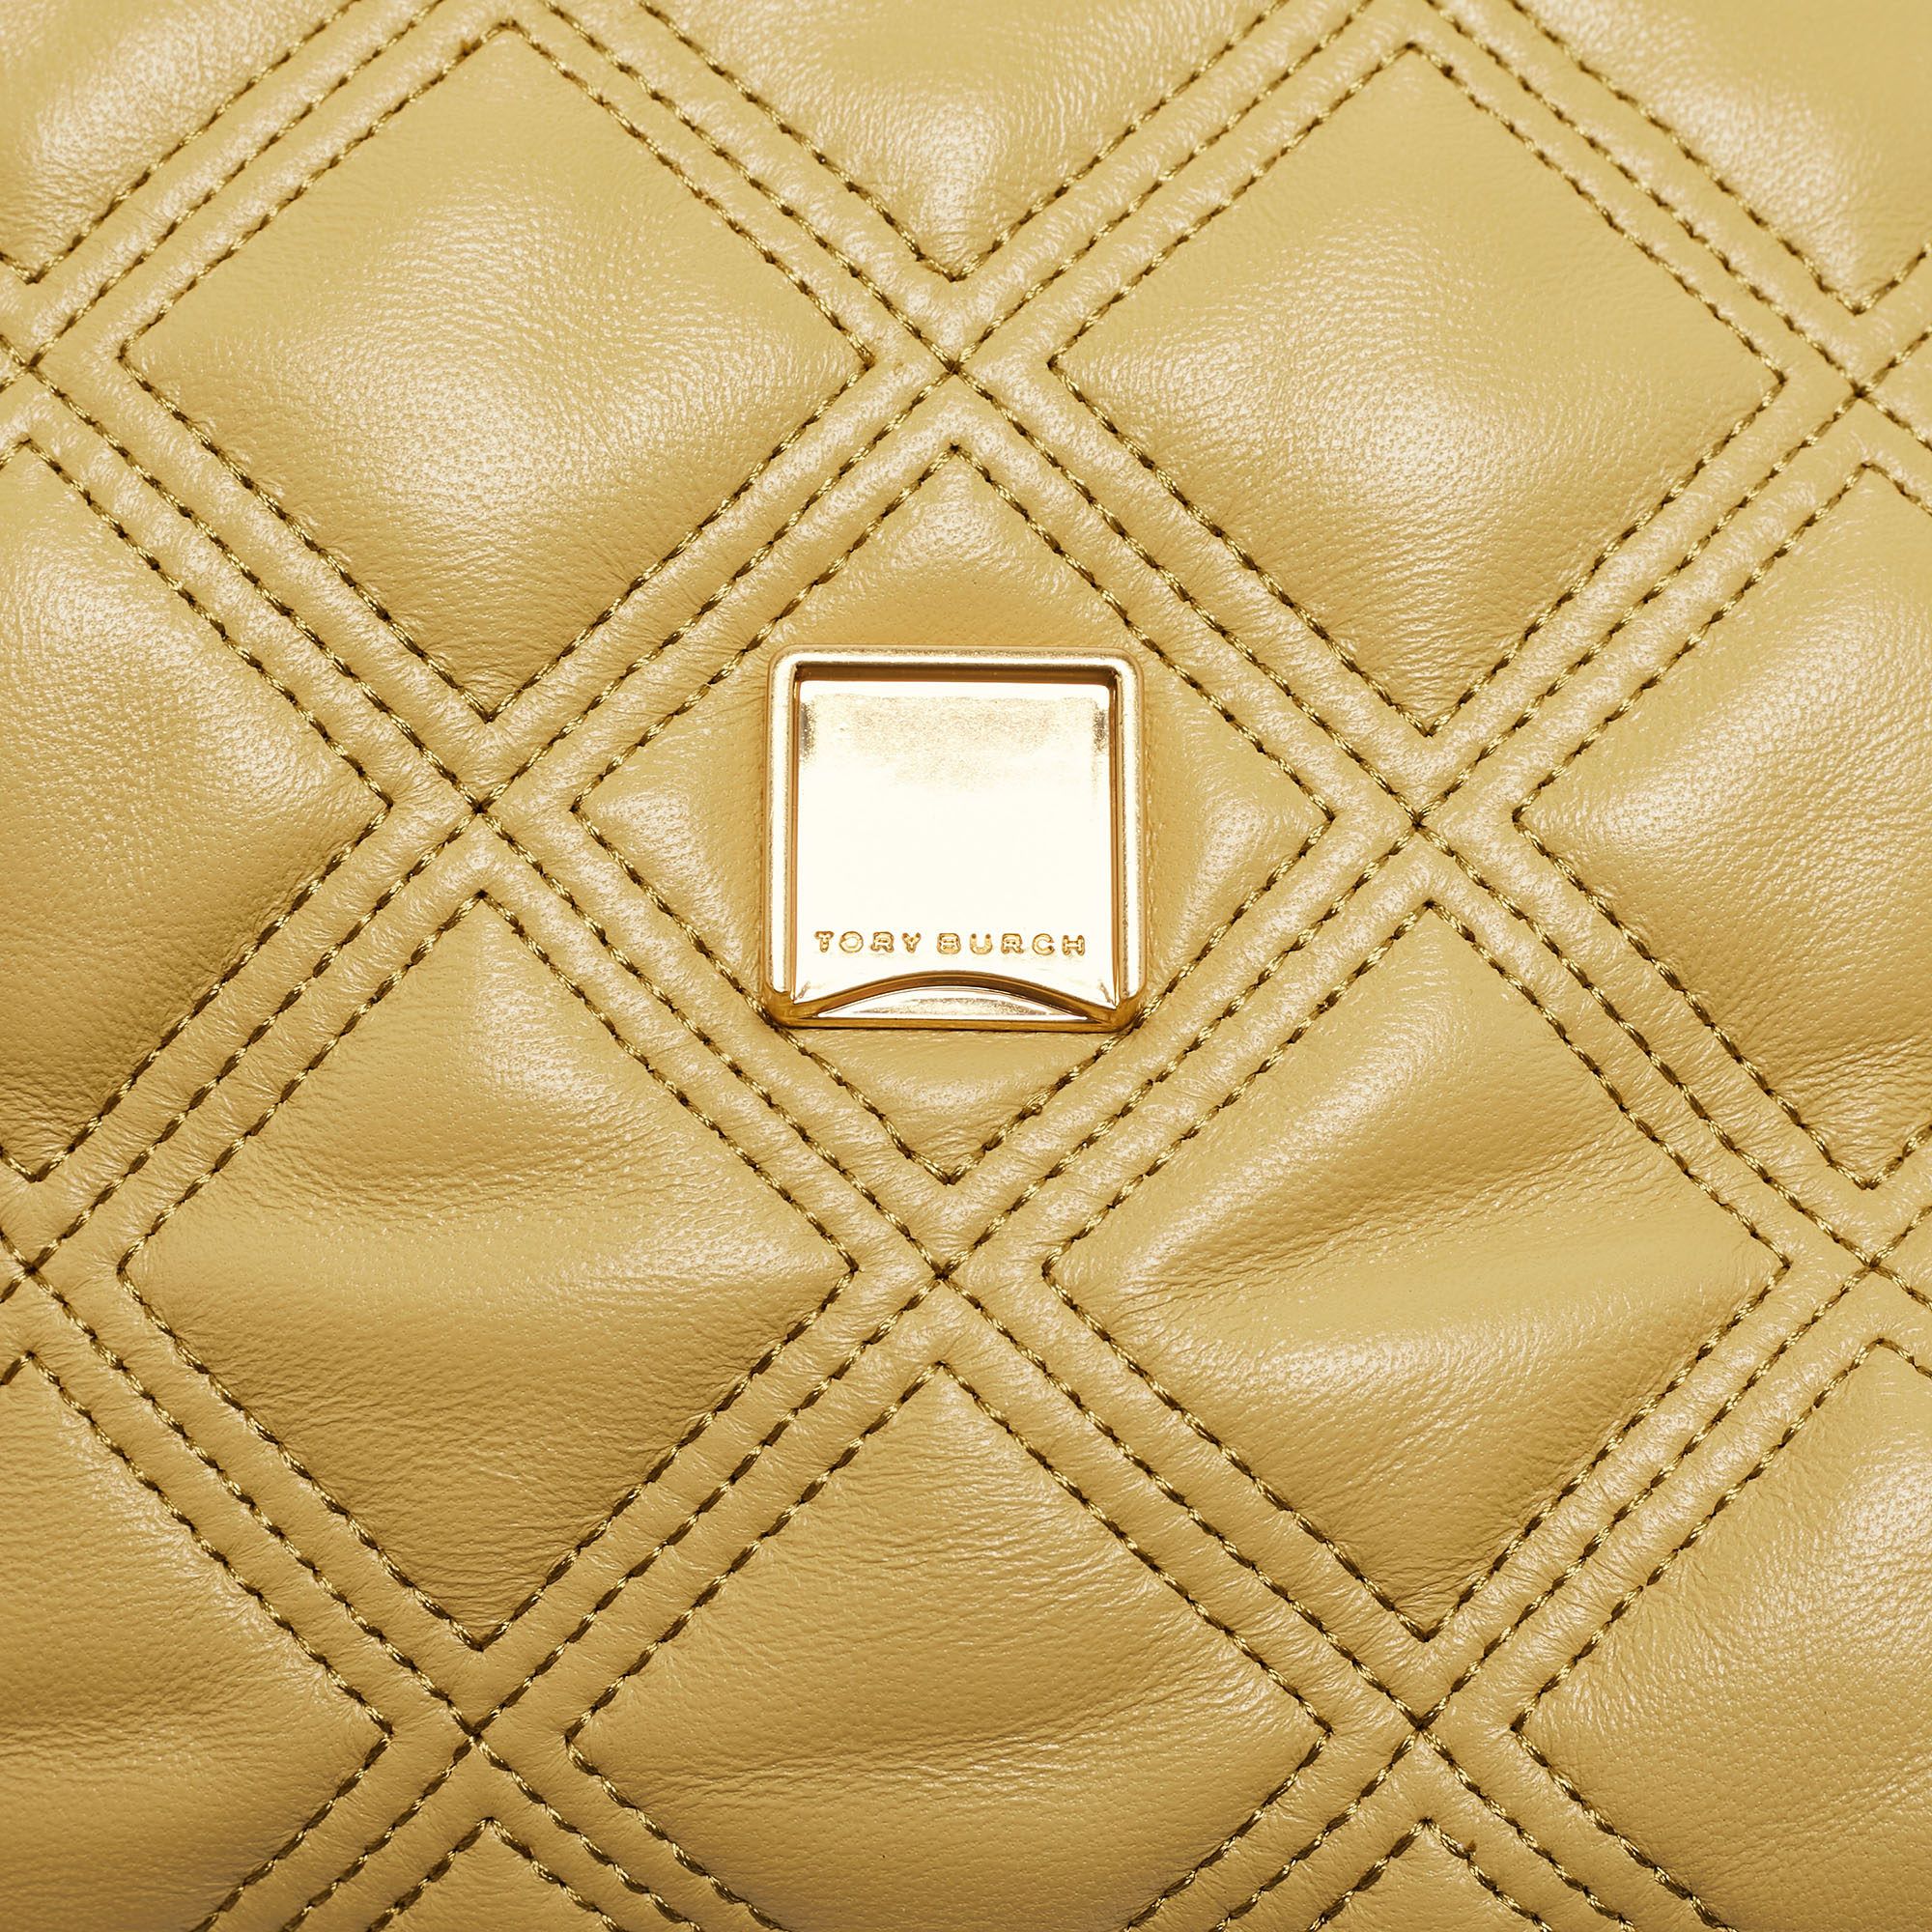 Tory Burch Yellow Quilted Leather Small Fleming Shoulder Bag